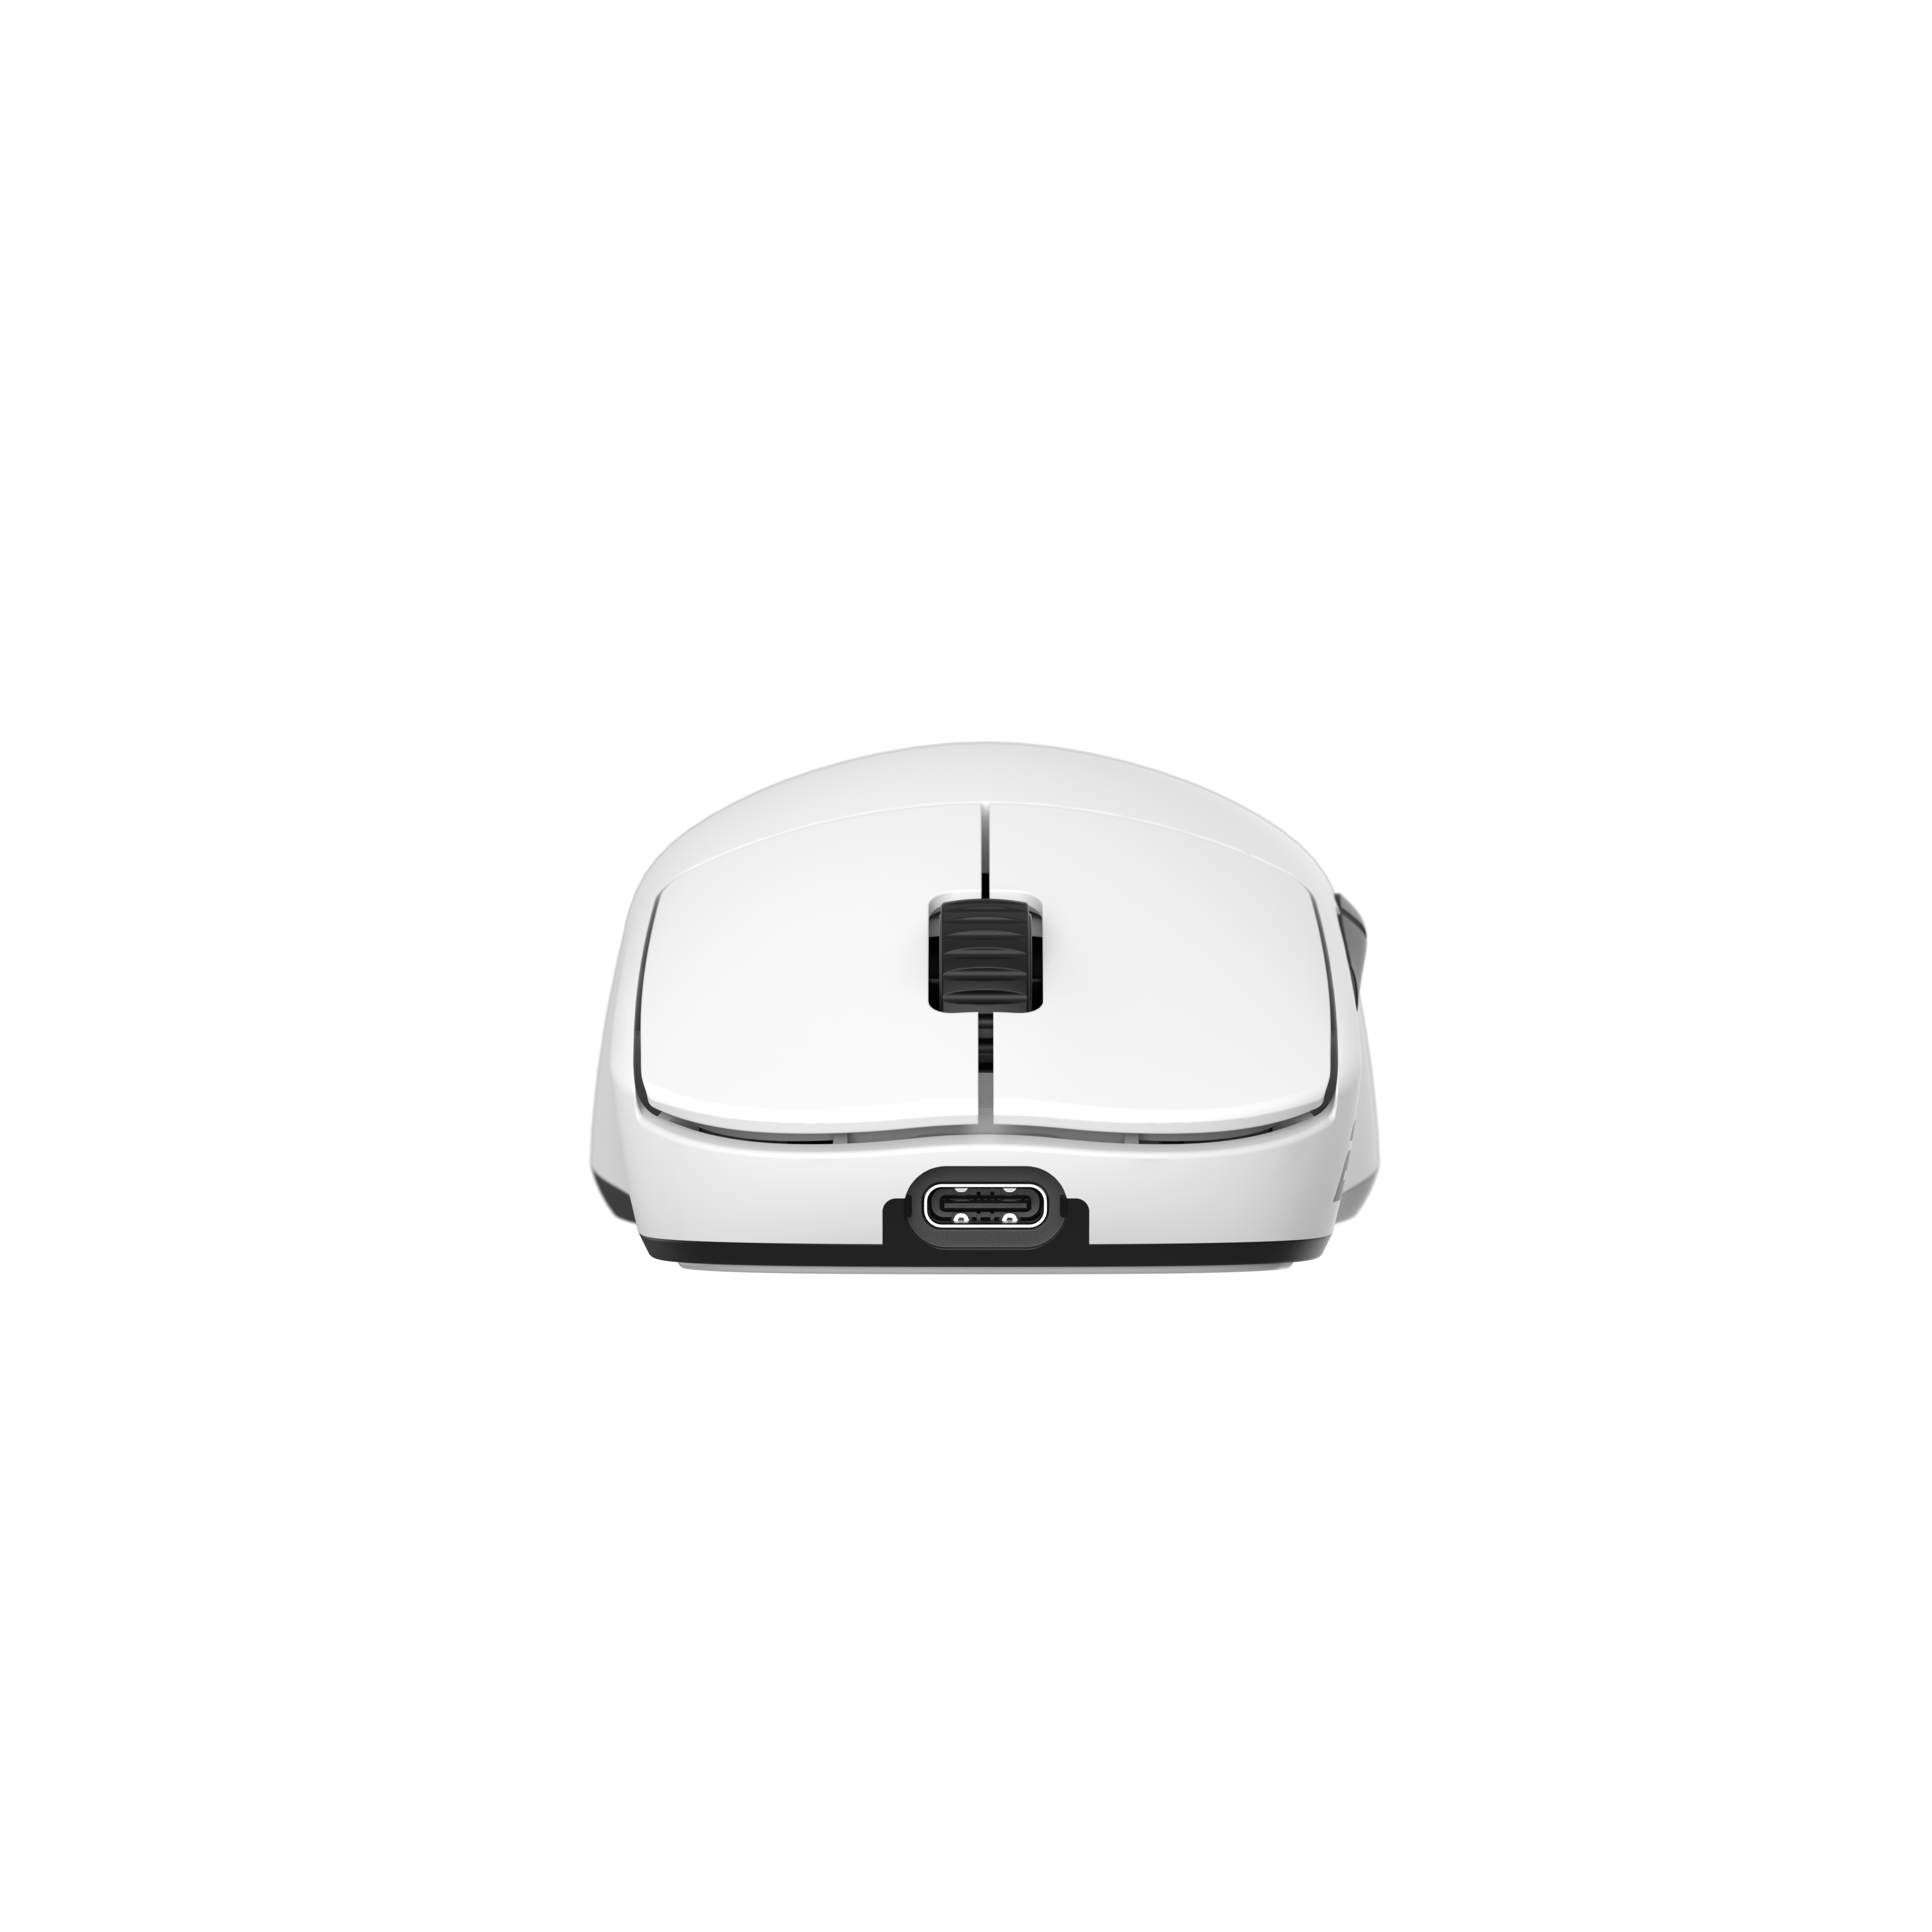 Endgame Gear - Endgame Gear OP1we Wireless Gaming Mouse - White